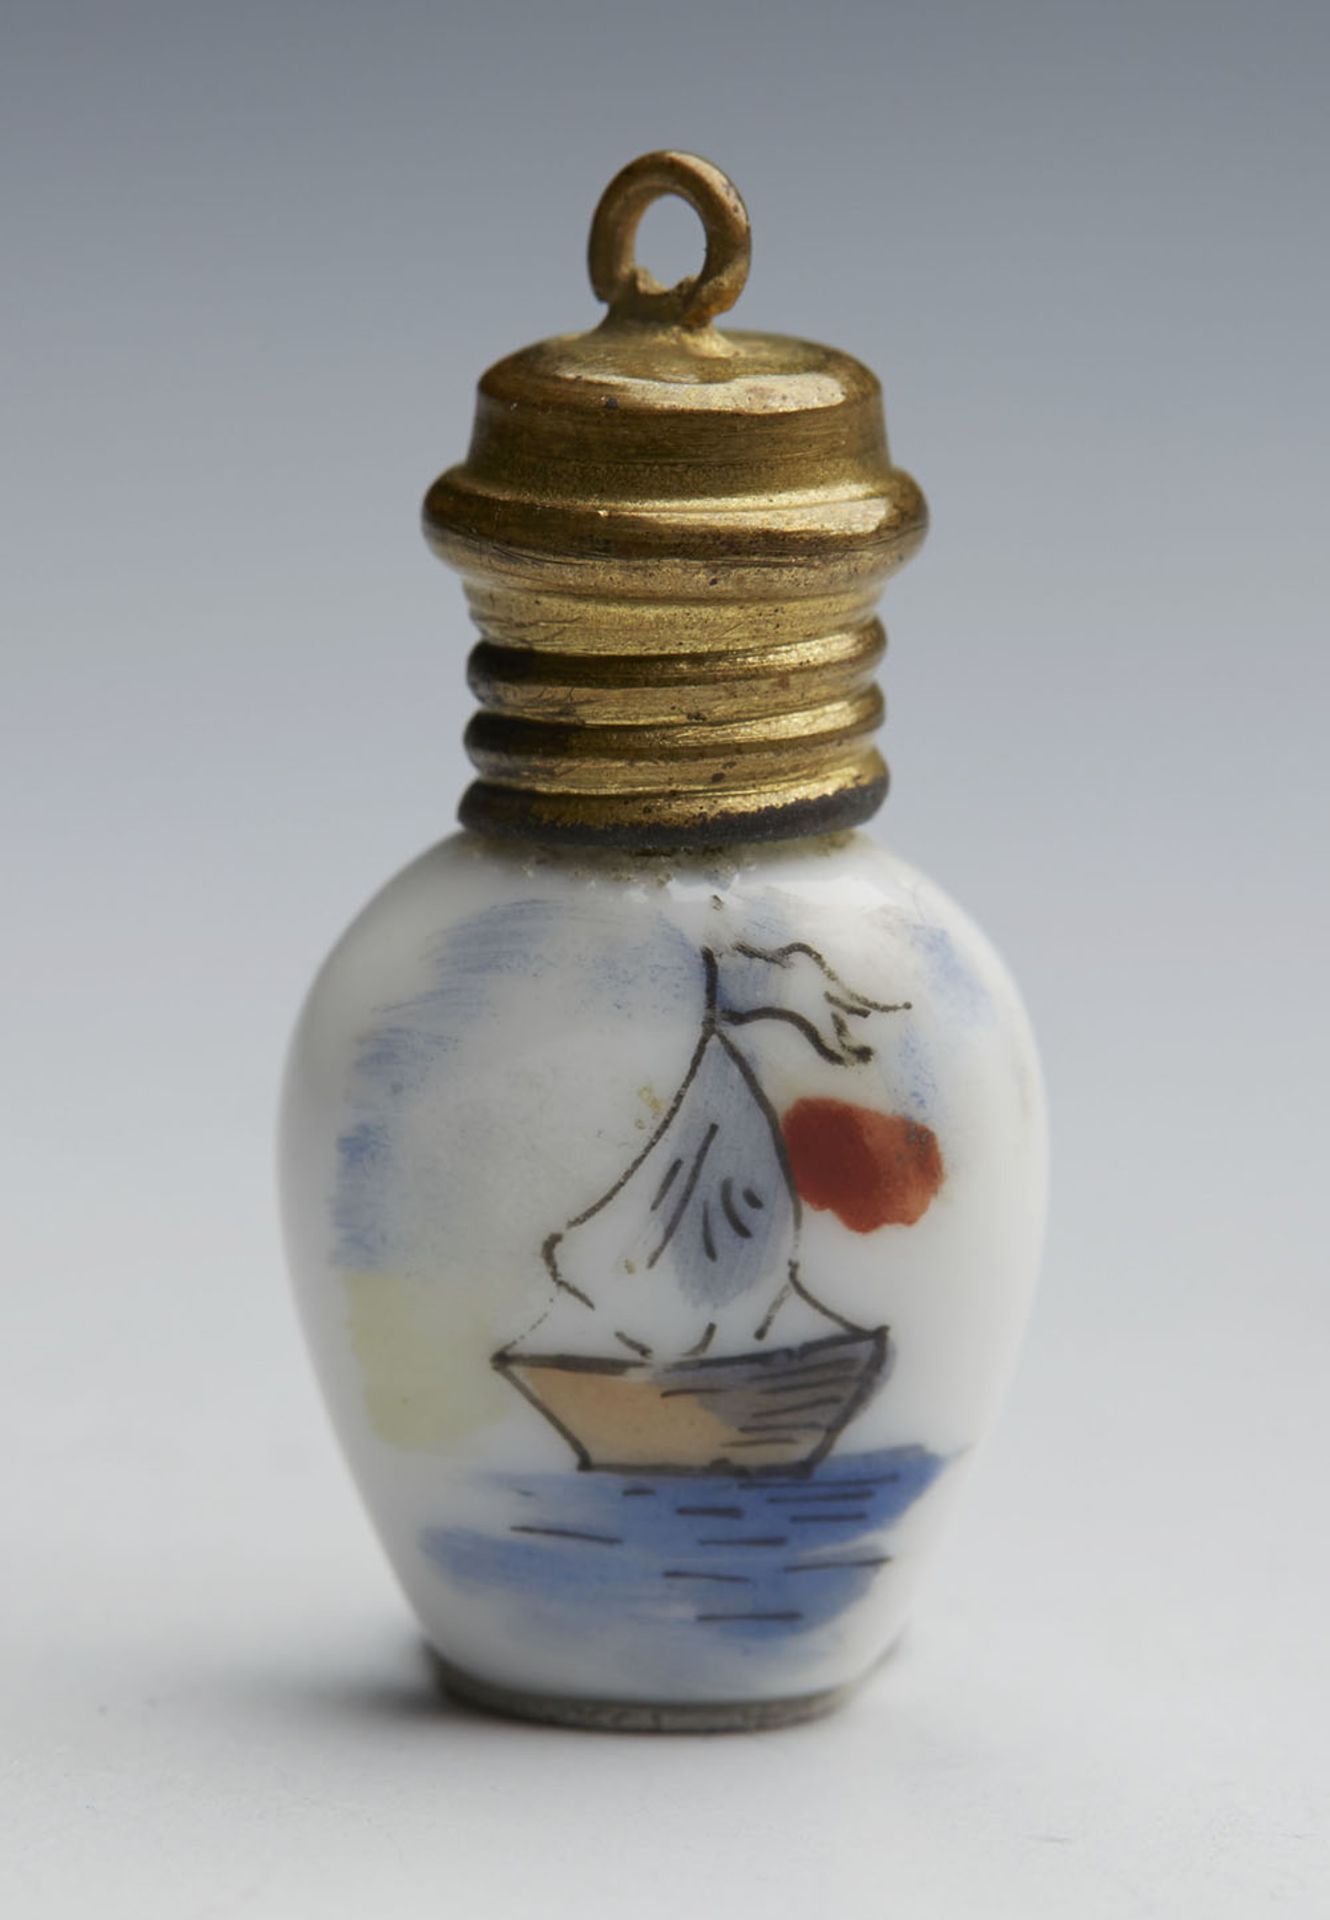 ANTIQUE MINIATURE SCENT BOTTLE WITH SAILING BOAT 19TH C. - Image 5 of 8